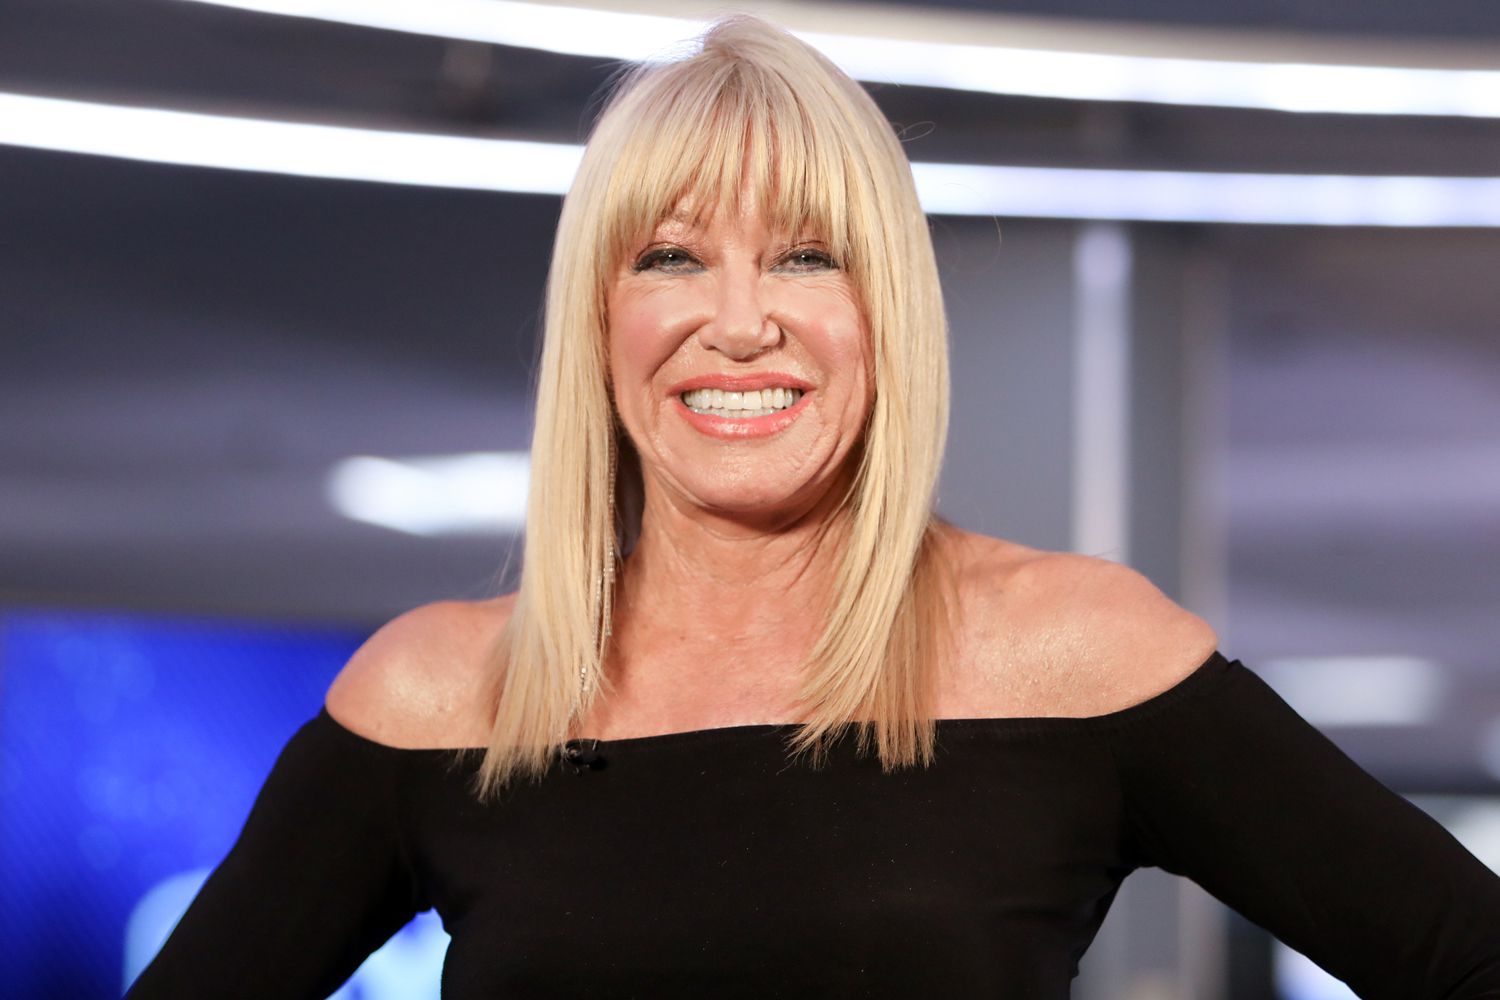 Suzanne Somers Birthday 101223 tout 91c520e5b6334d3d874328769bd6df4f